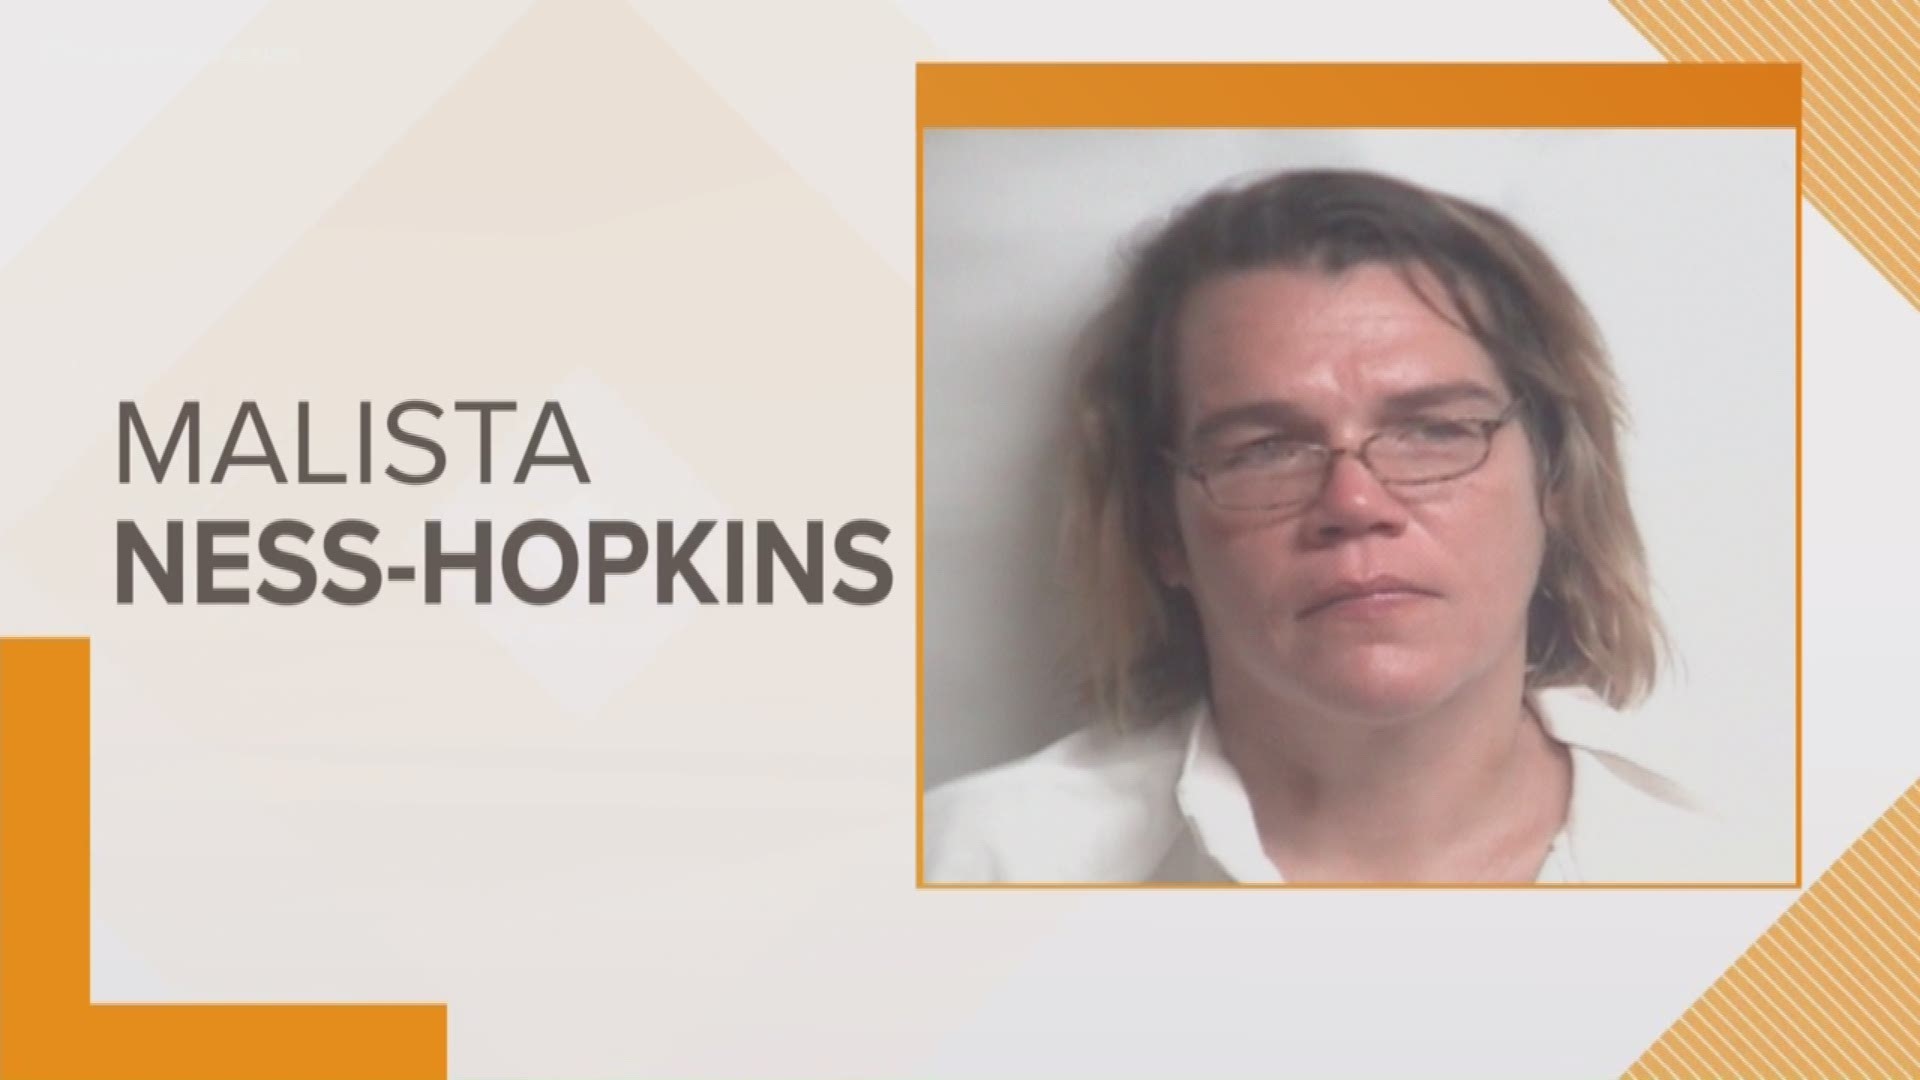 The woman accused of putting her two toddlers inside of cages in Accomack County has pleaded guilty to 5 counts of child abuse and neglect.